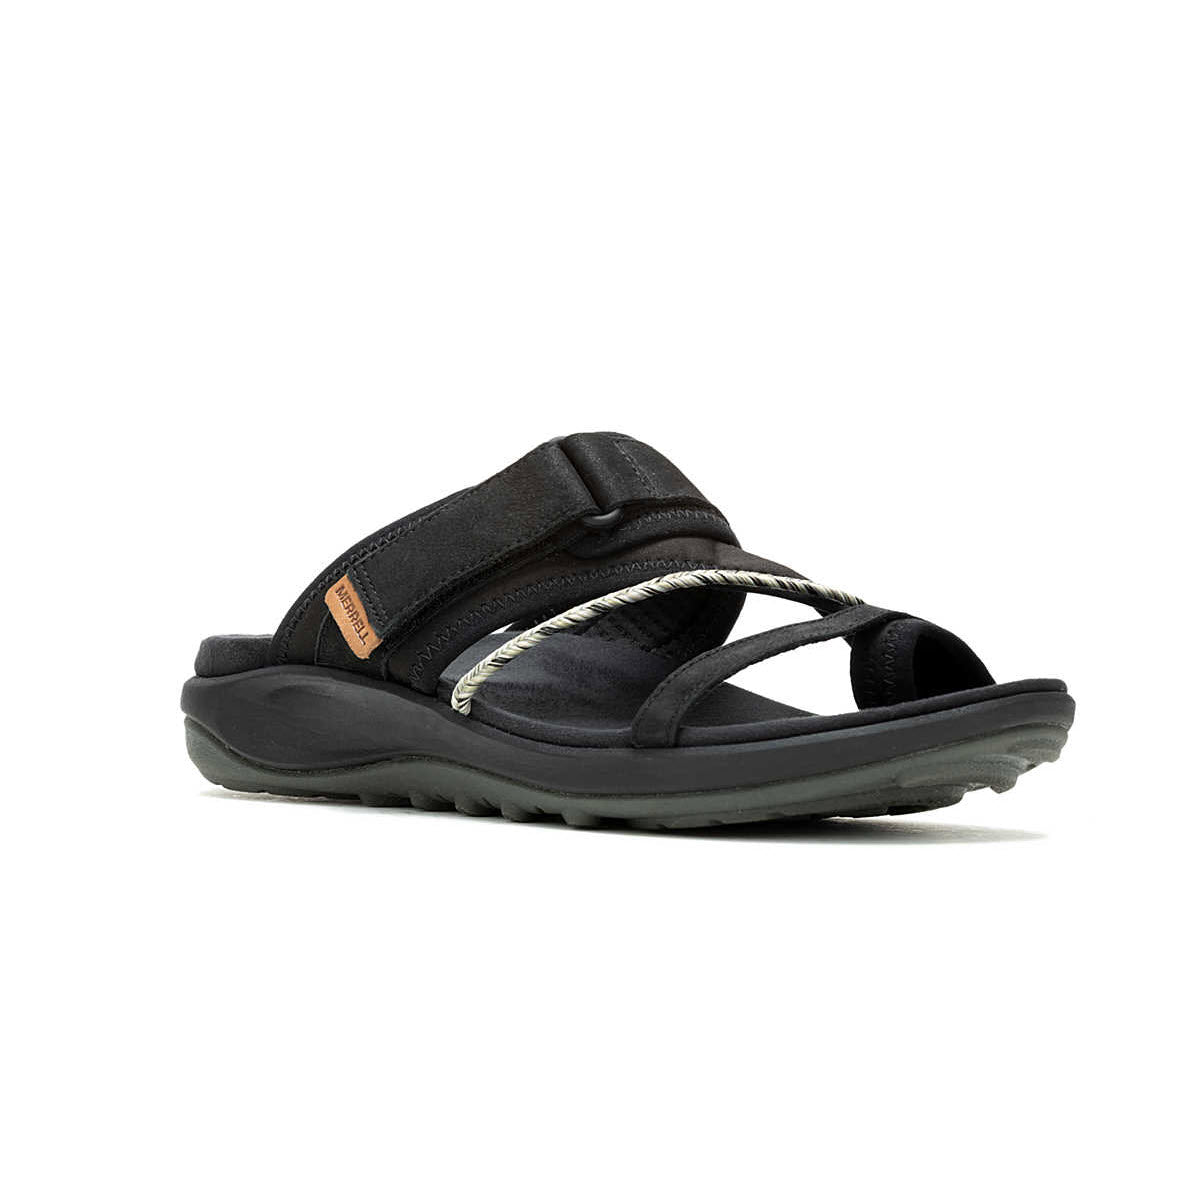 Men&#39;s Merrell Terran 4 Post black sports sandal with a thick sole and adjustable straps, displayed on a white background.